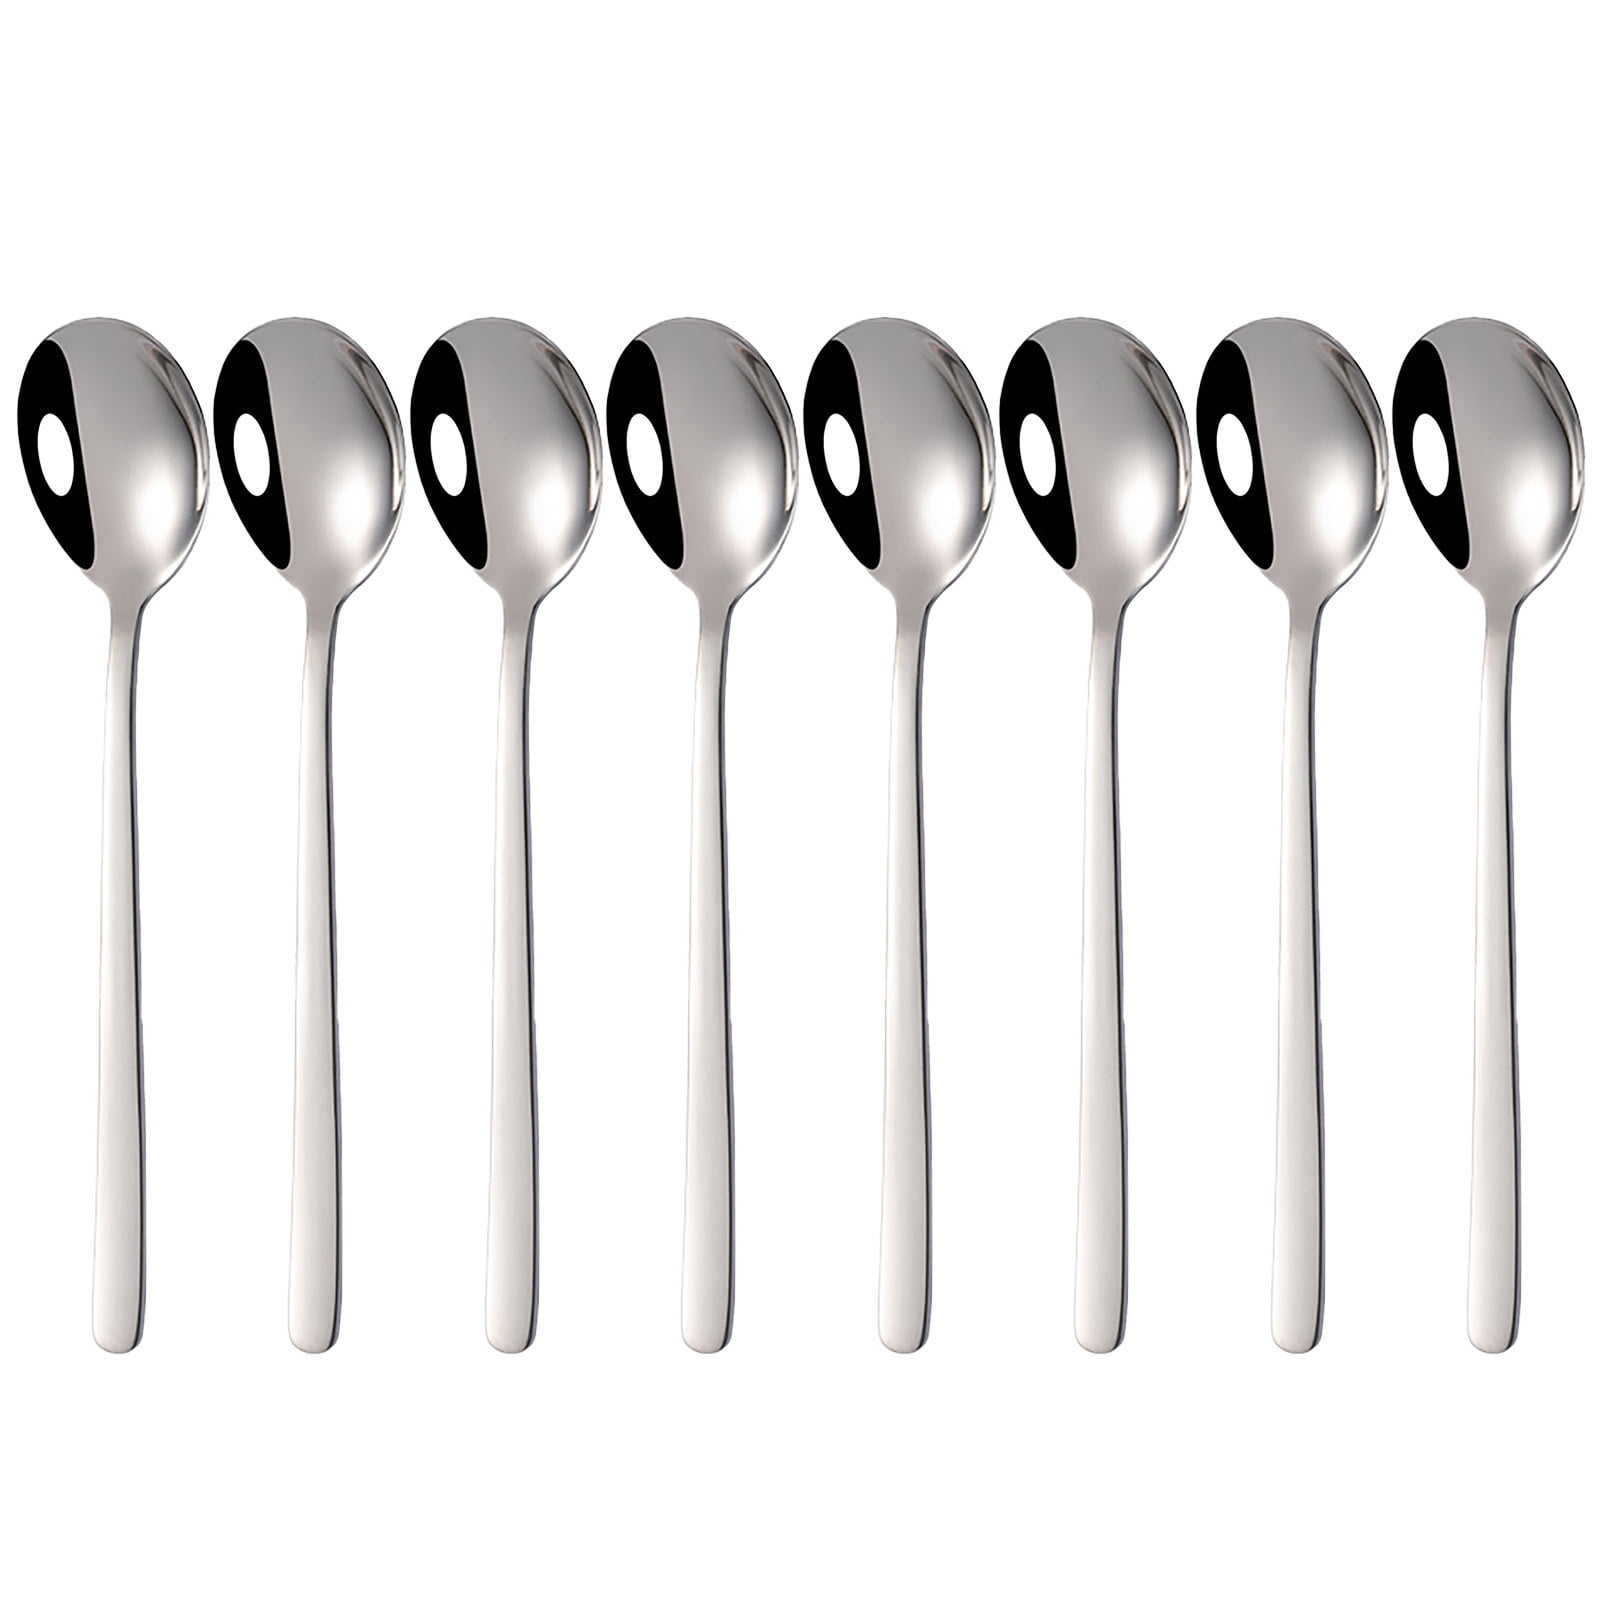 Stainless Steel Stir Spoons Coffee Tea Spoon Flatware Drinking Tools,Stainless Steel Cooking Spoons,Kitchen Tool,Home Supplies,Spoon for Bar Silver